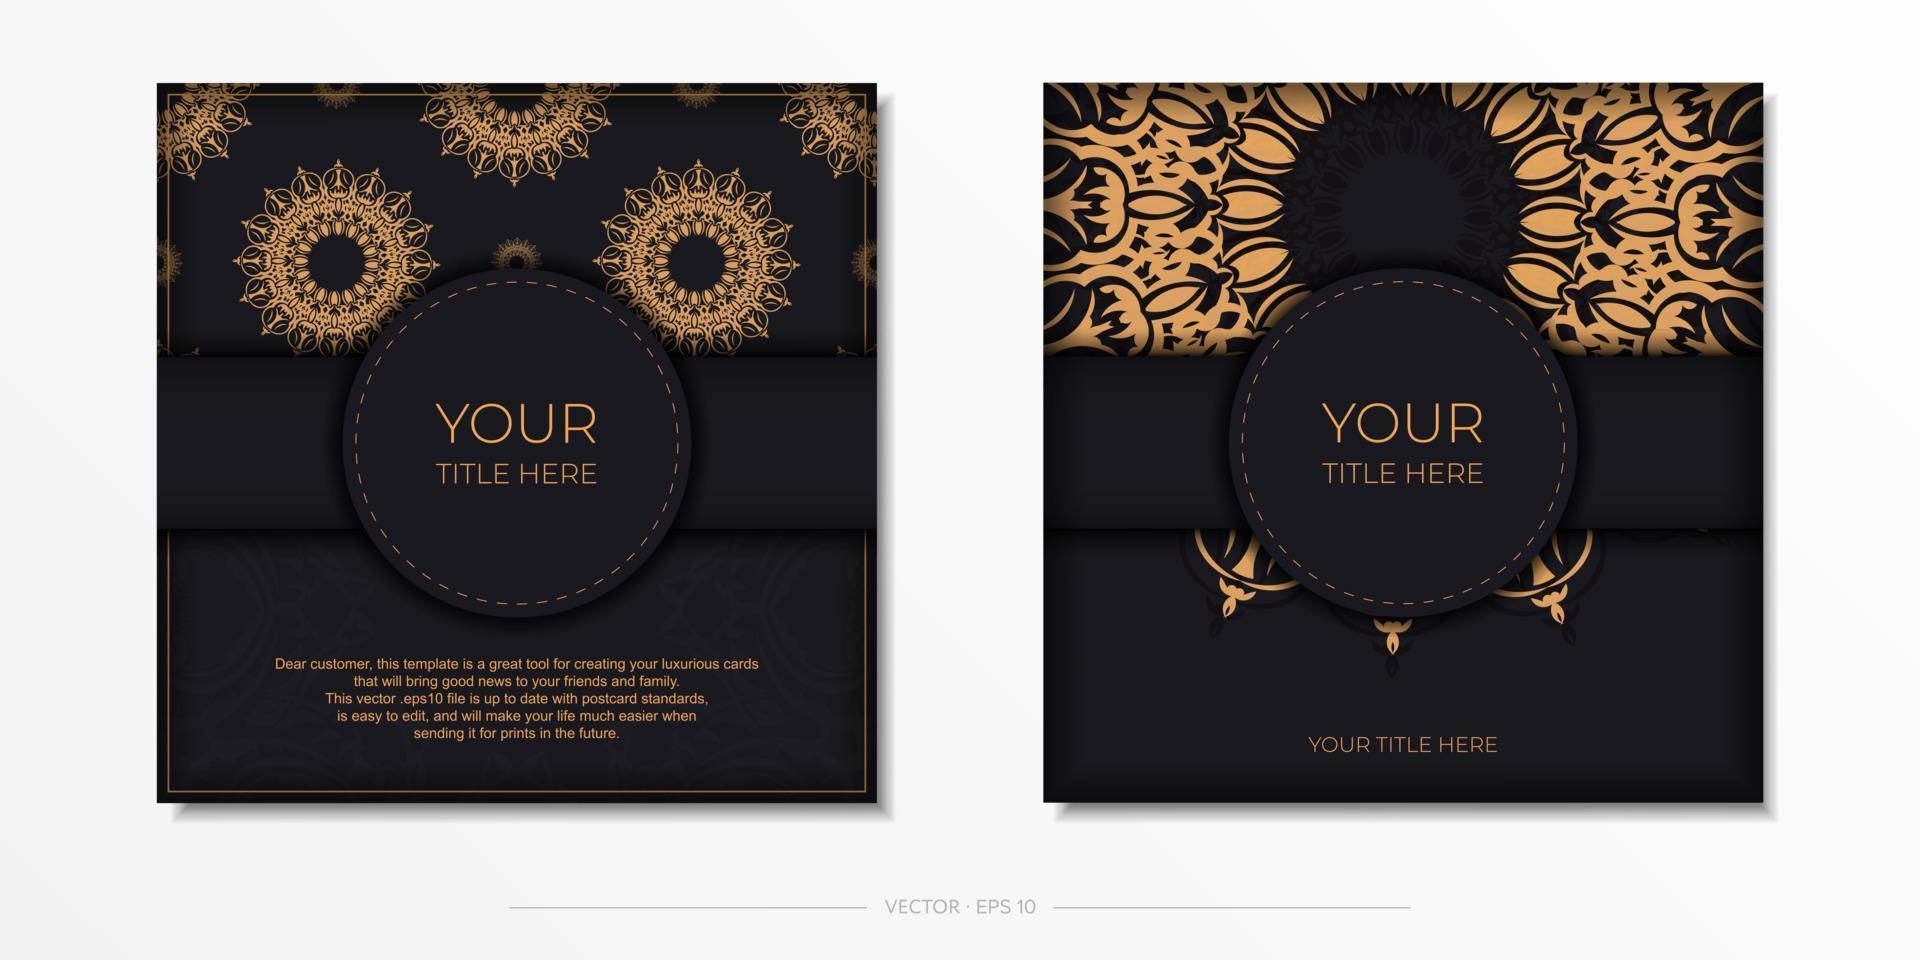 Square Vector Preparing postcards in Black color with luxurious patterns. Template for print design invitation card with vintage ornament.